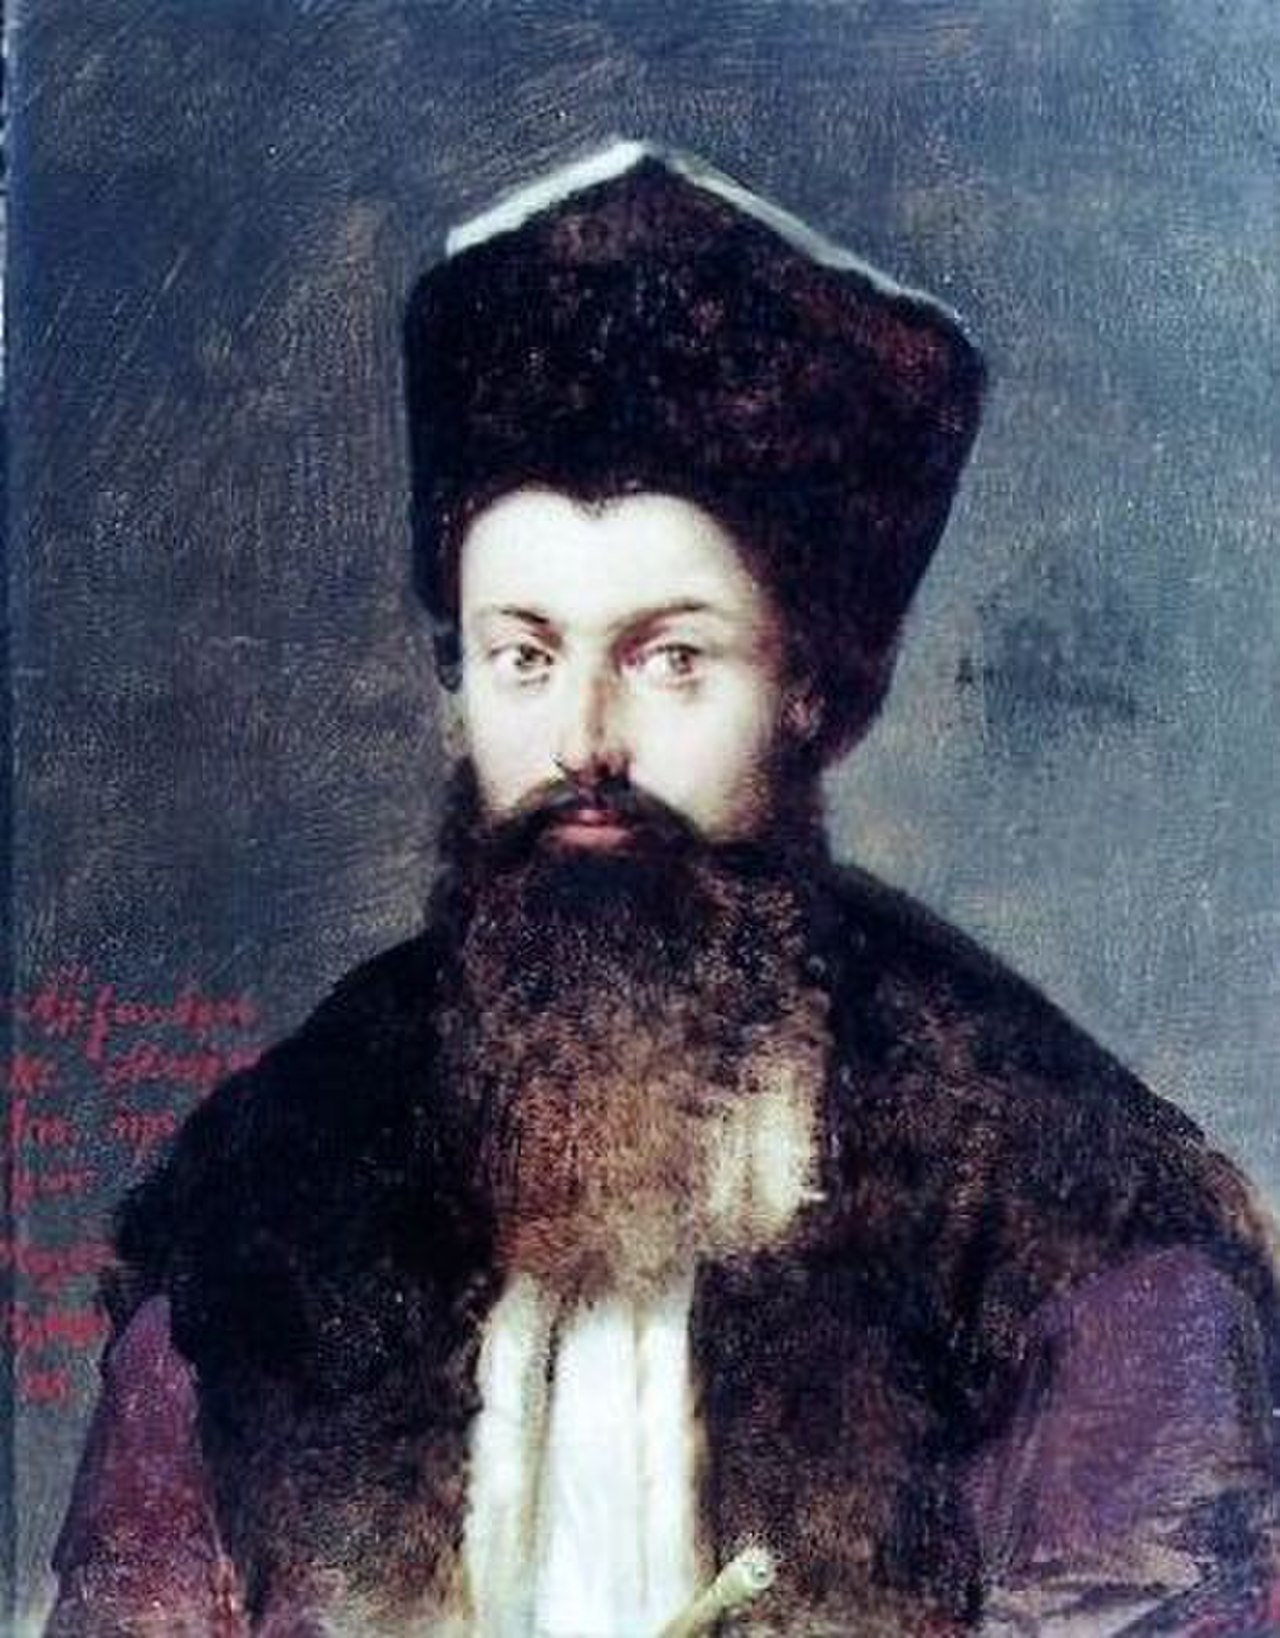 Portrait of a bearded man with a hat